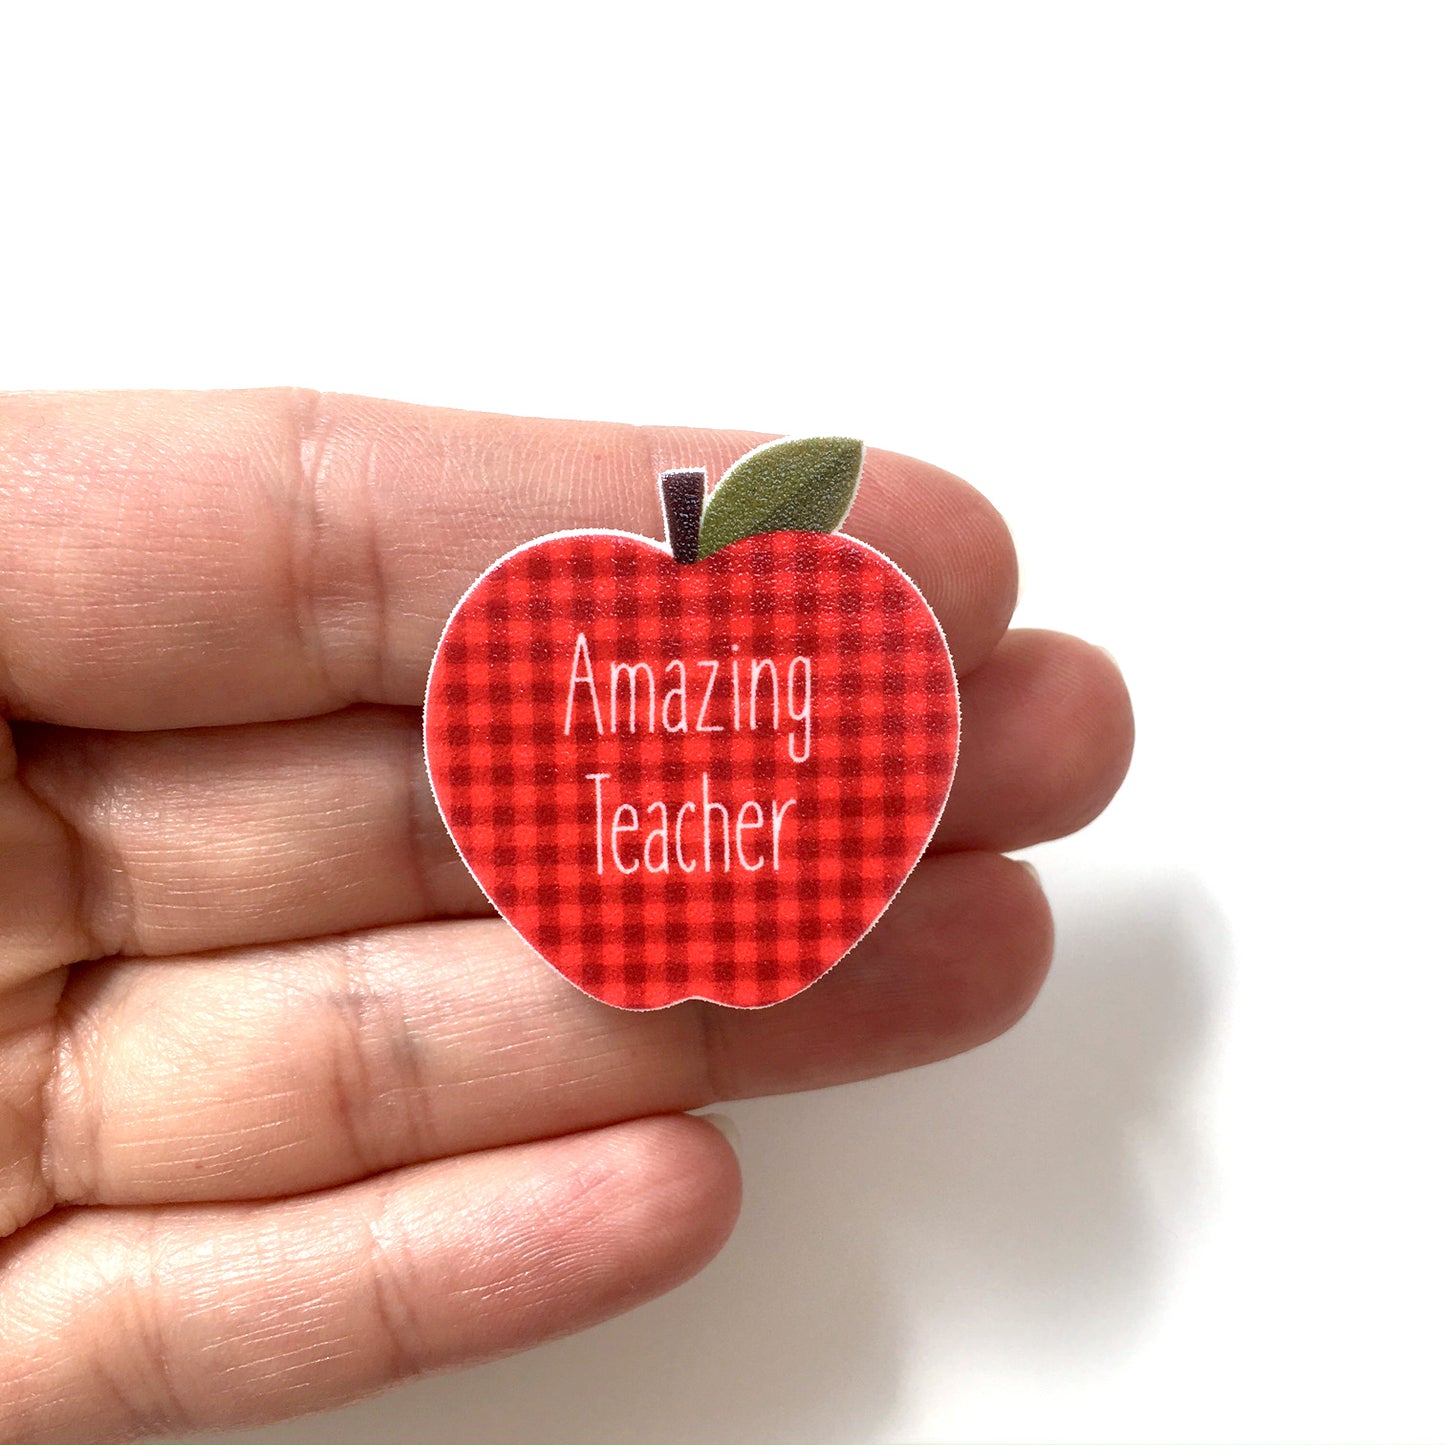 Amazing teacher lanyard pin - A is for apple